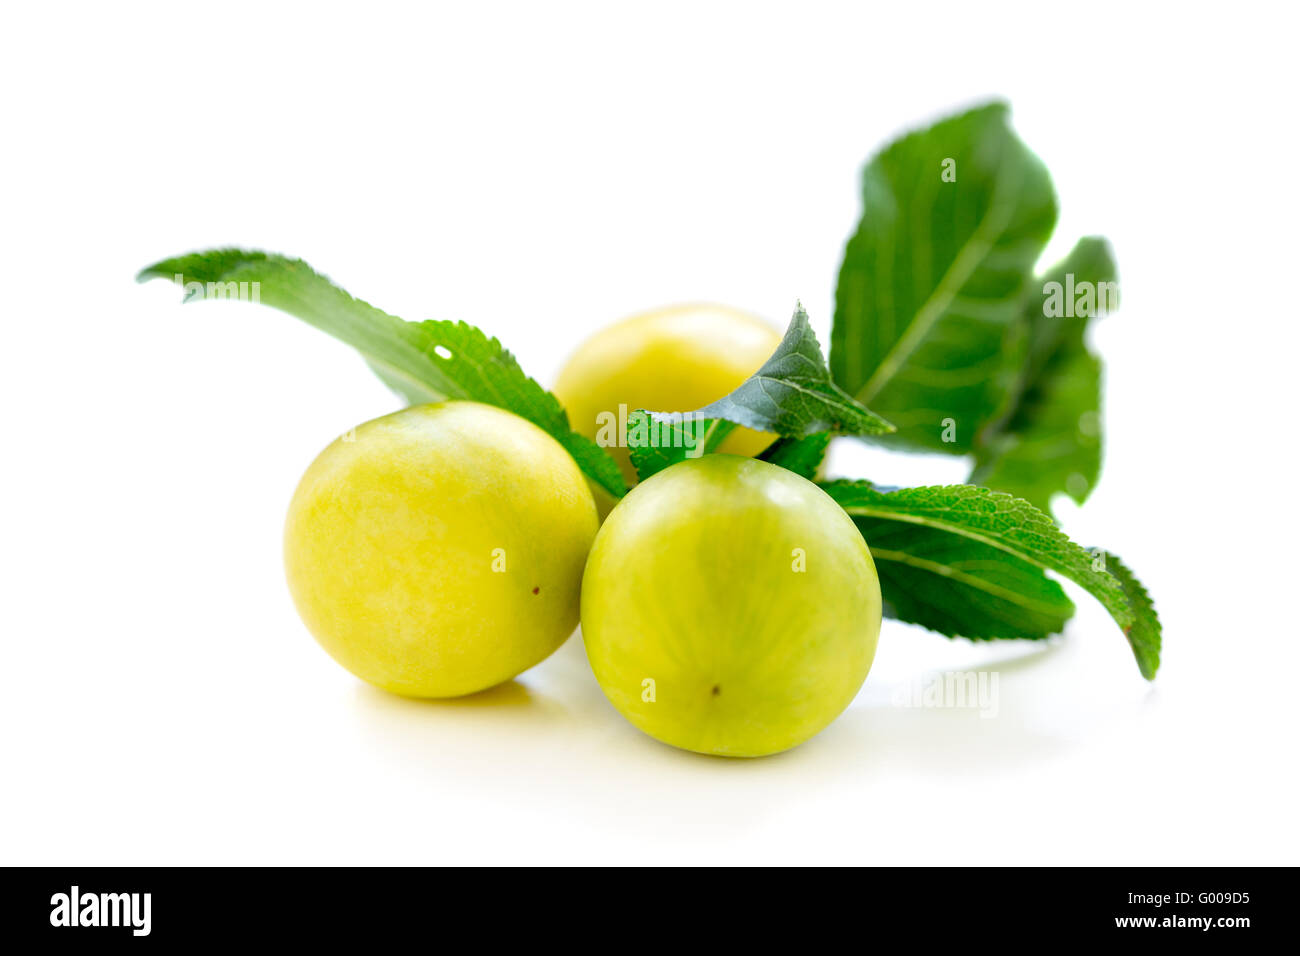 Small yellow plums. Stock Photo